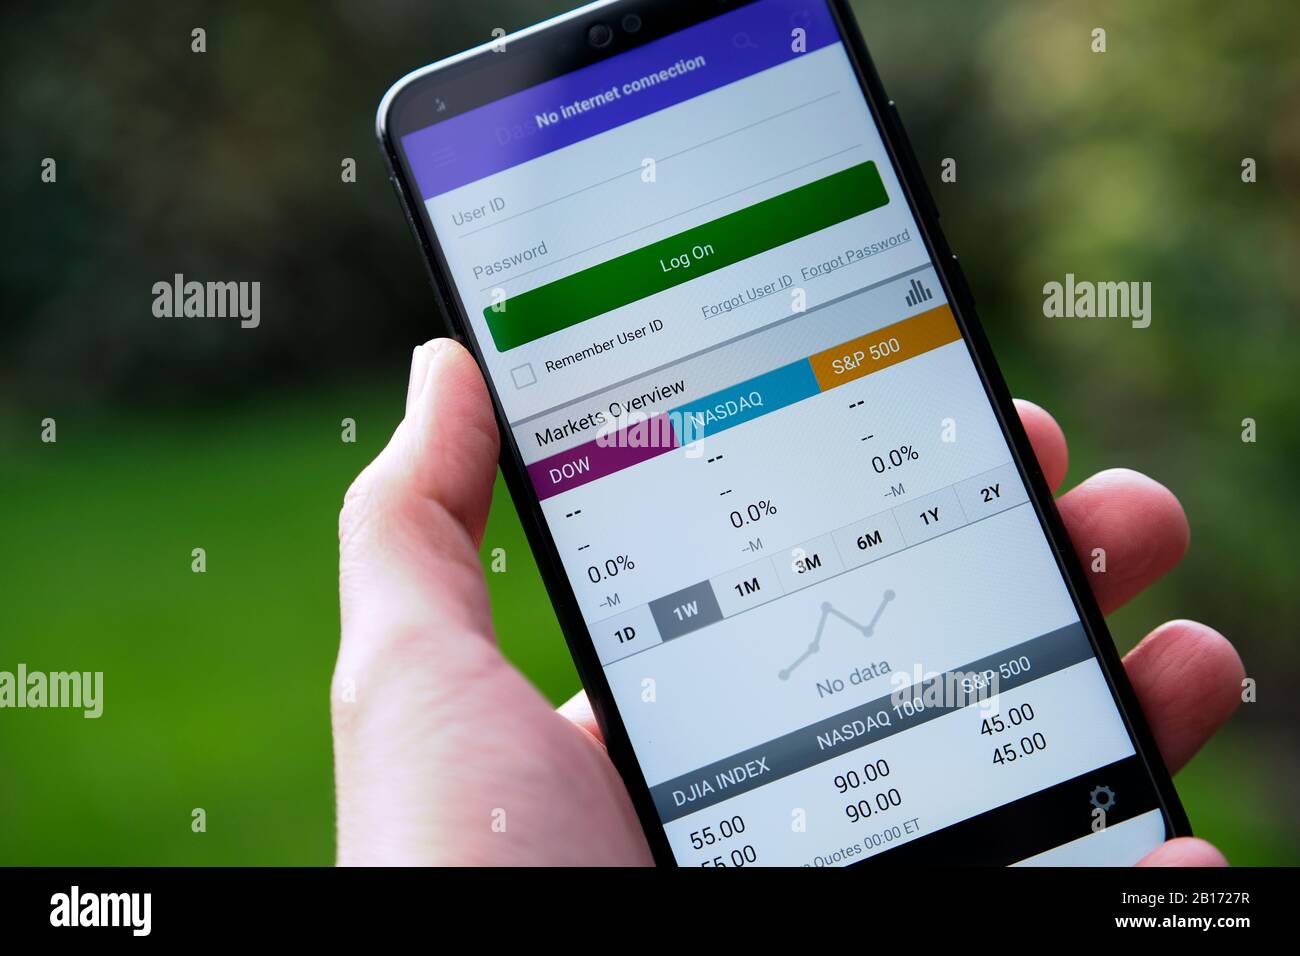 E-TRADE app login screen seen on the smartphone hold in a hand. Stock Photo